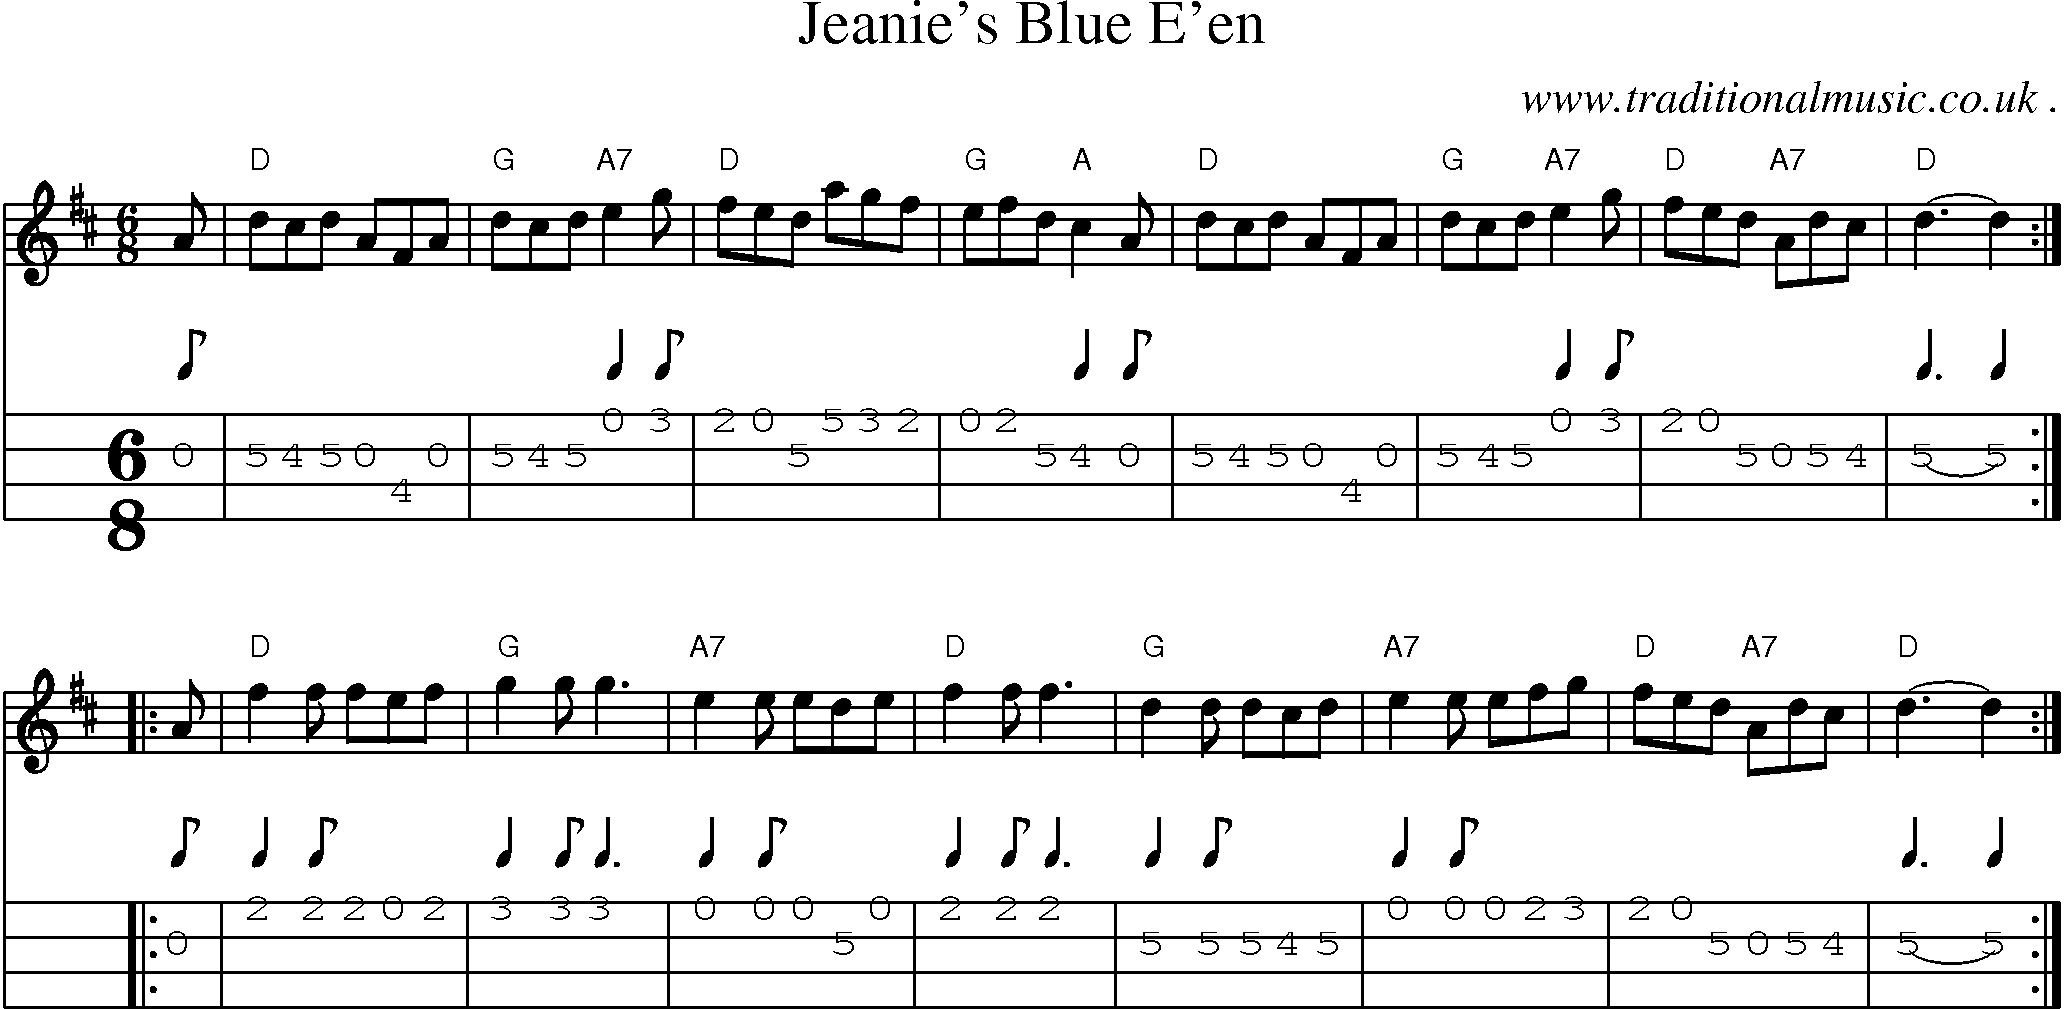 Sheet-music  score, Chords and Mandolin Tabs for Jeanies Blue Een